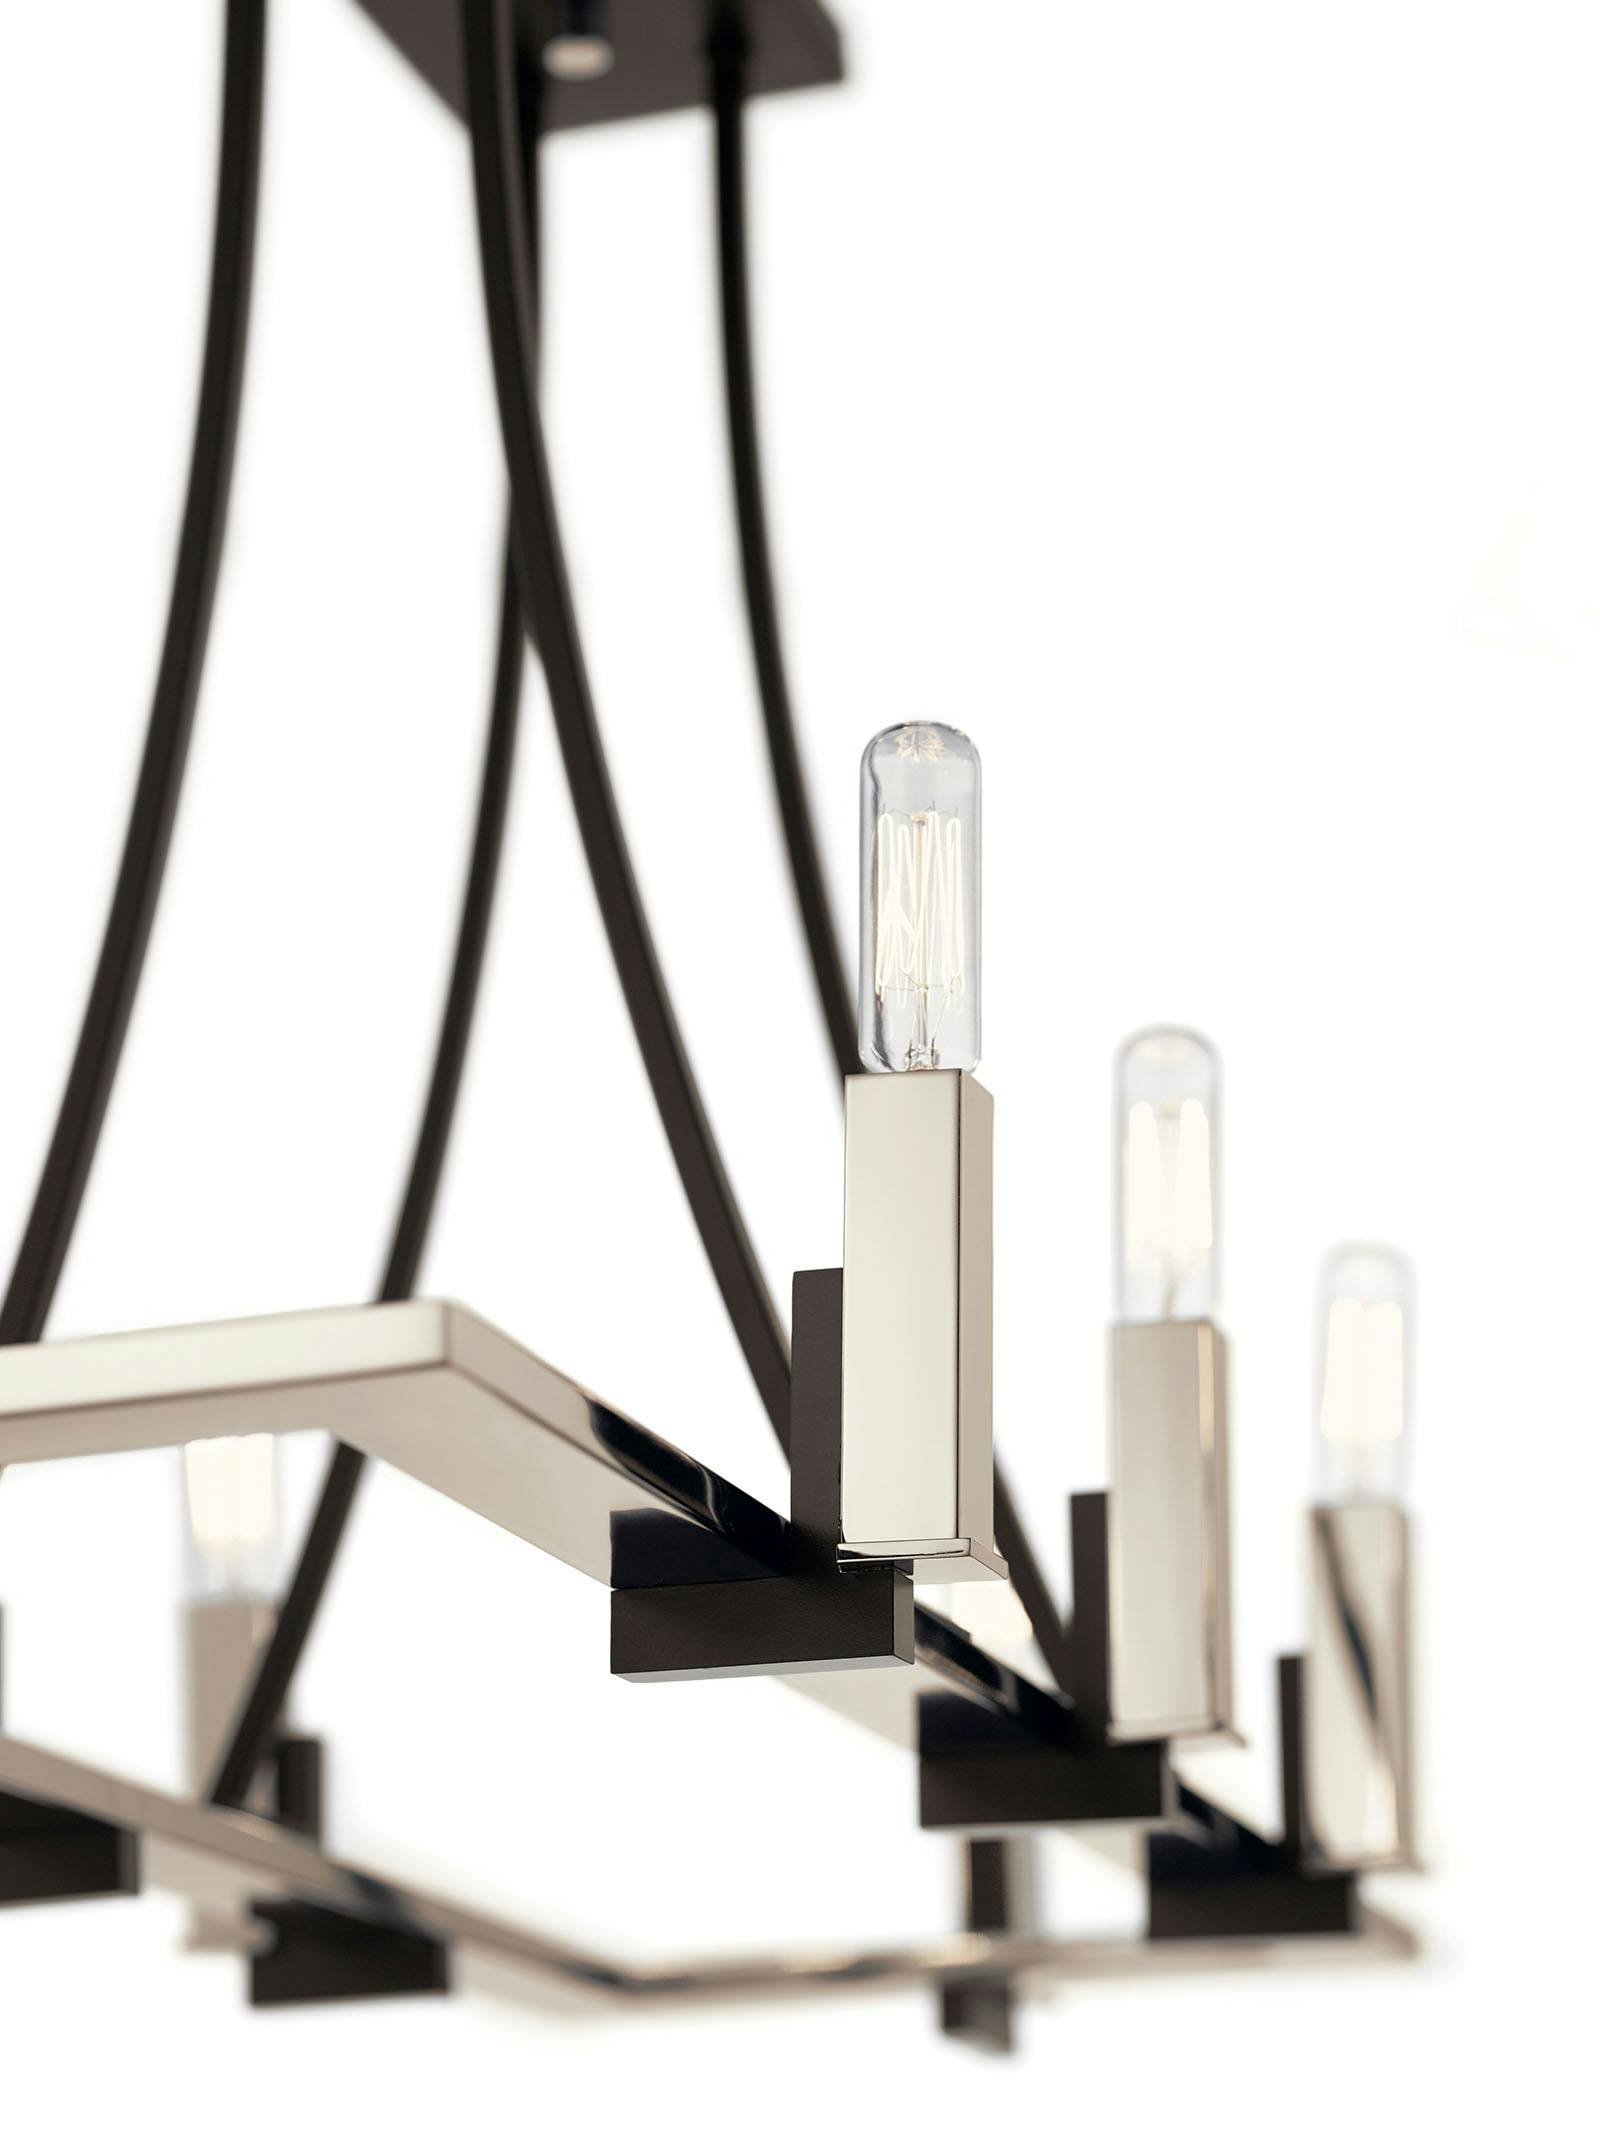 Close up view of the Bensimone Linear 8 Light Chandelier Black on a white background